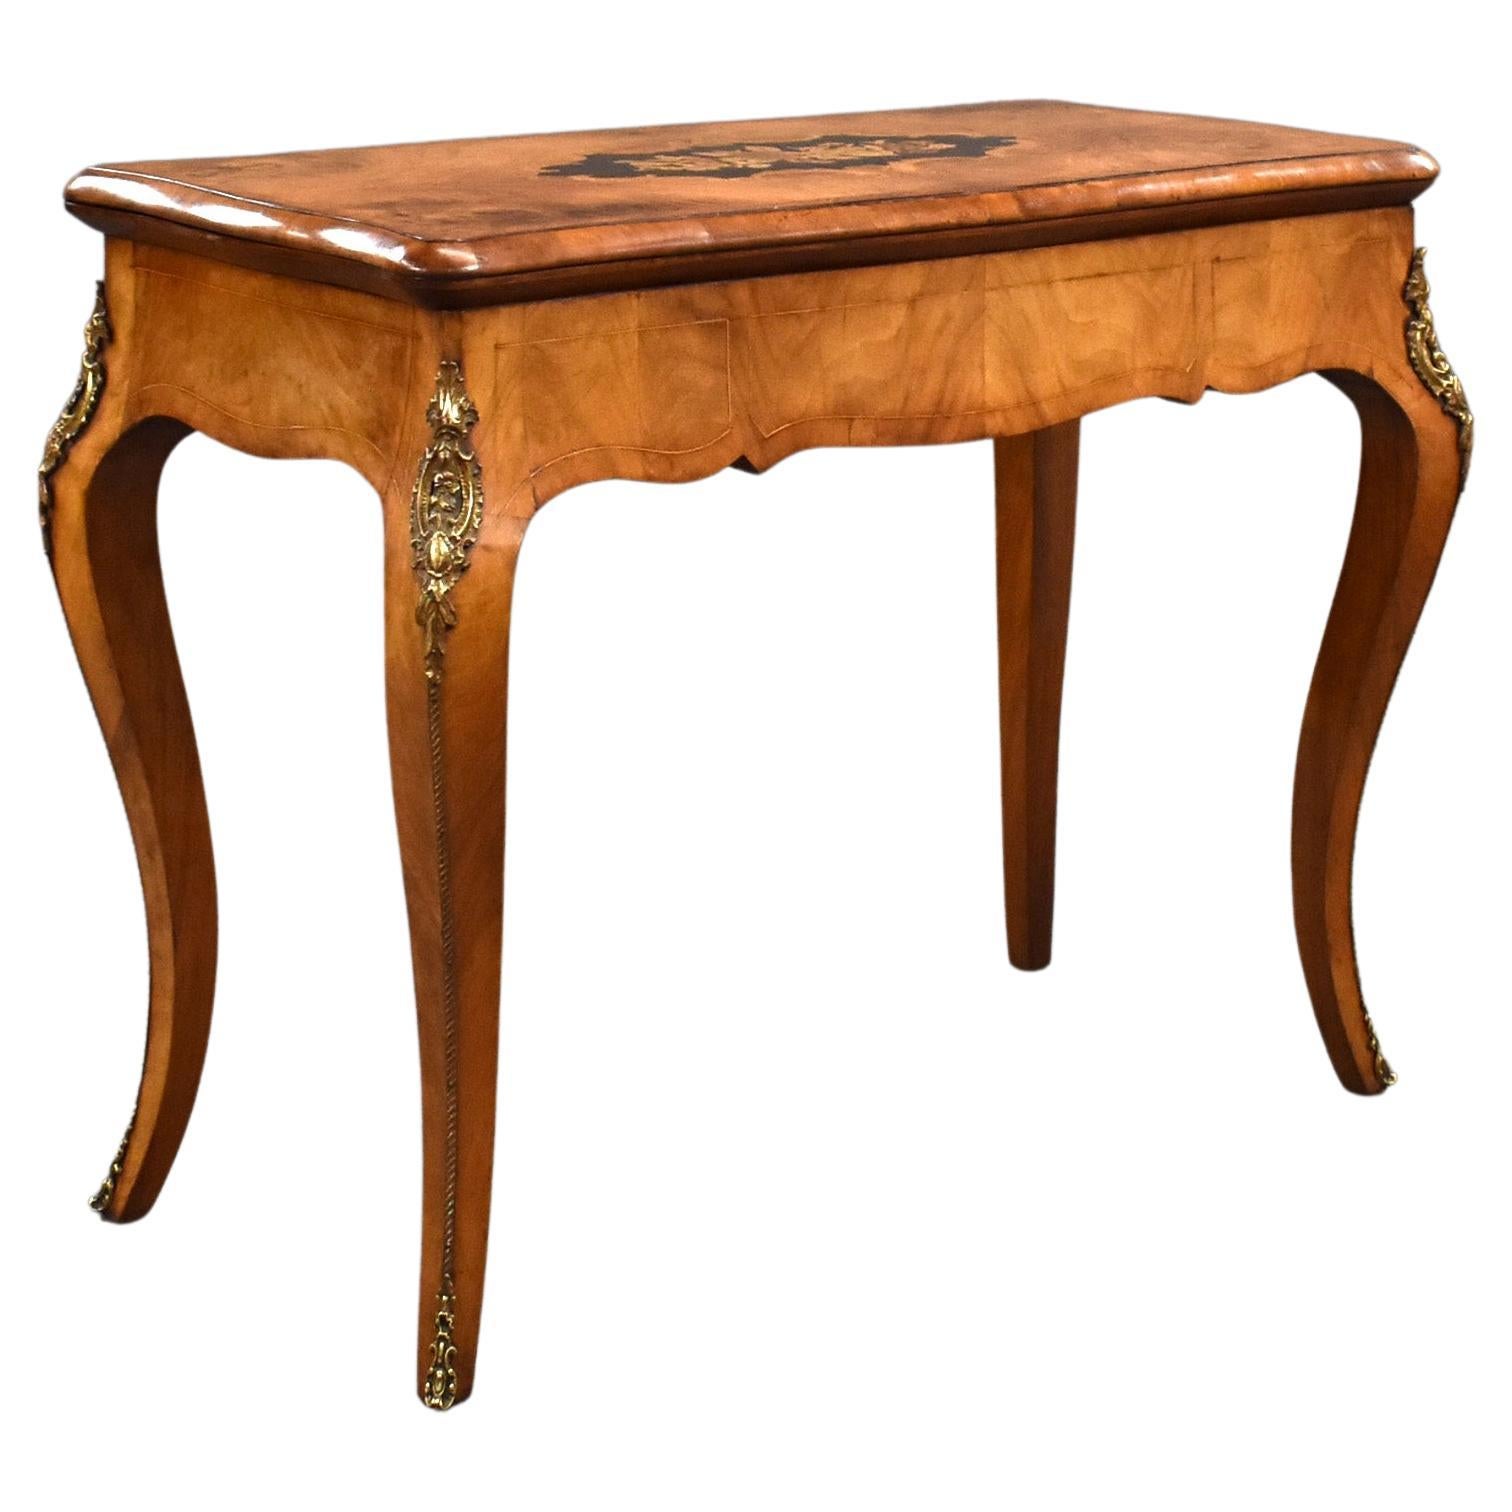 19th Century English Victorian Burl Walnut and Marquetry Inlaid Card Table For Sale